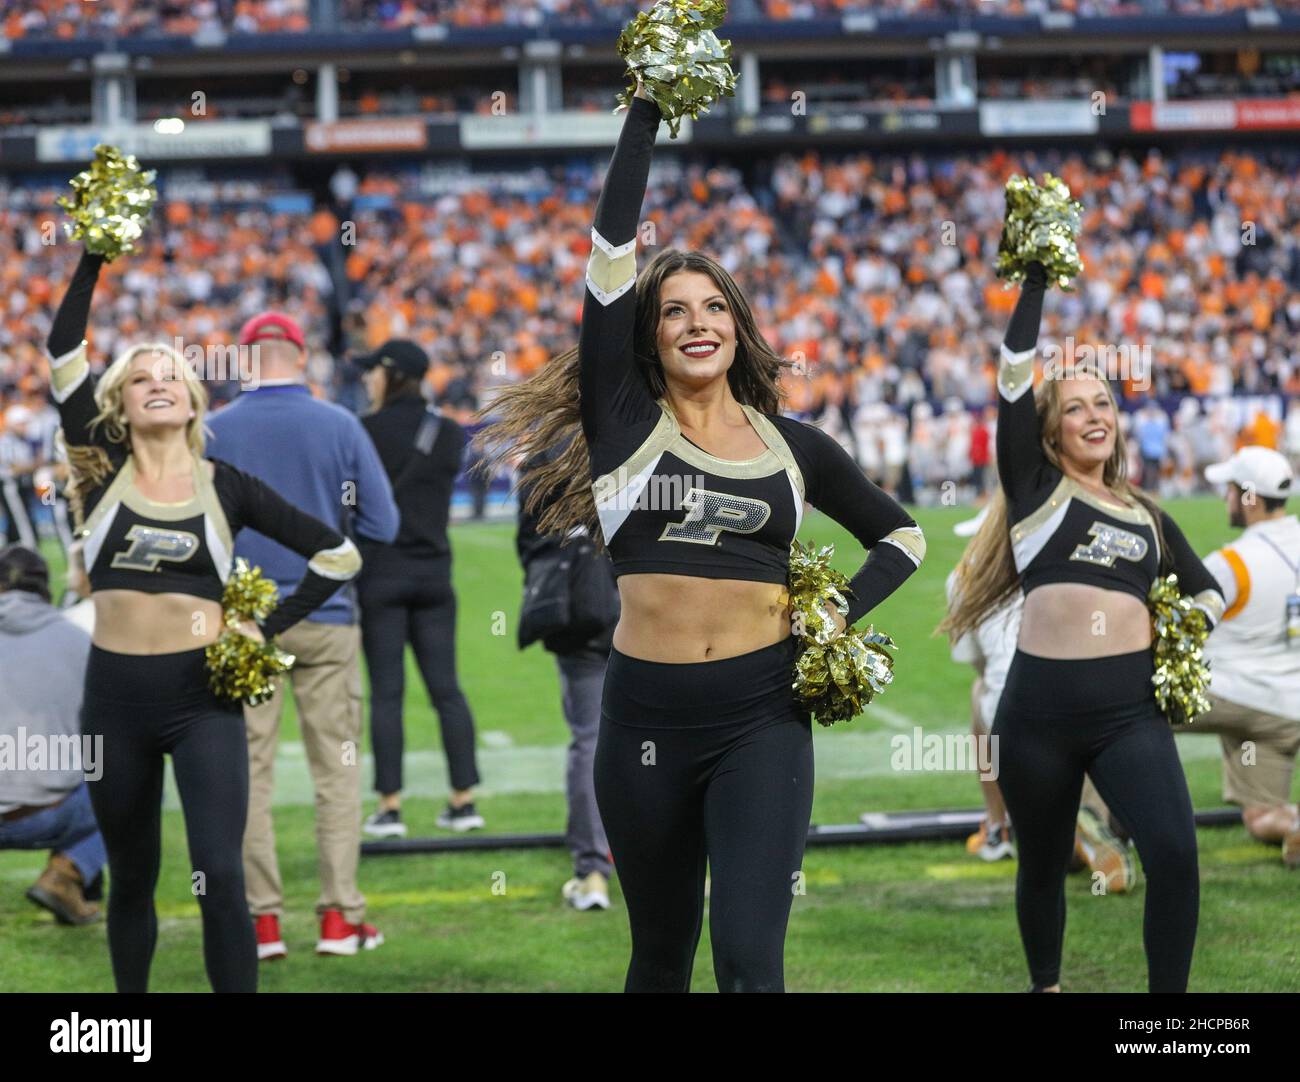 Nashville, TN, USA. 30th Dec, 2021. The Purdue Dance Team performs on the sidelines during the TransPerfect Music City Bowl football game between the Purdue Boilermakers and the Tennessee Volunteeers at Nissan Stadium in Nashville, TN. Kyle Okita/CSM/Alamy Live News Stock Photo